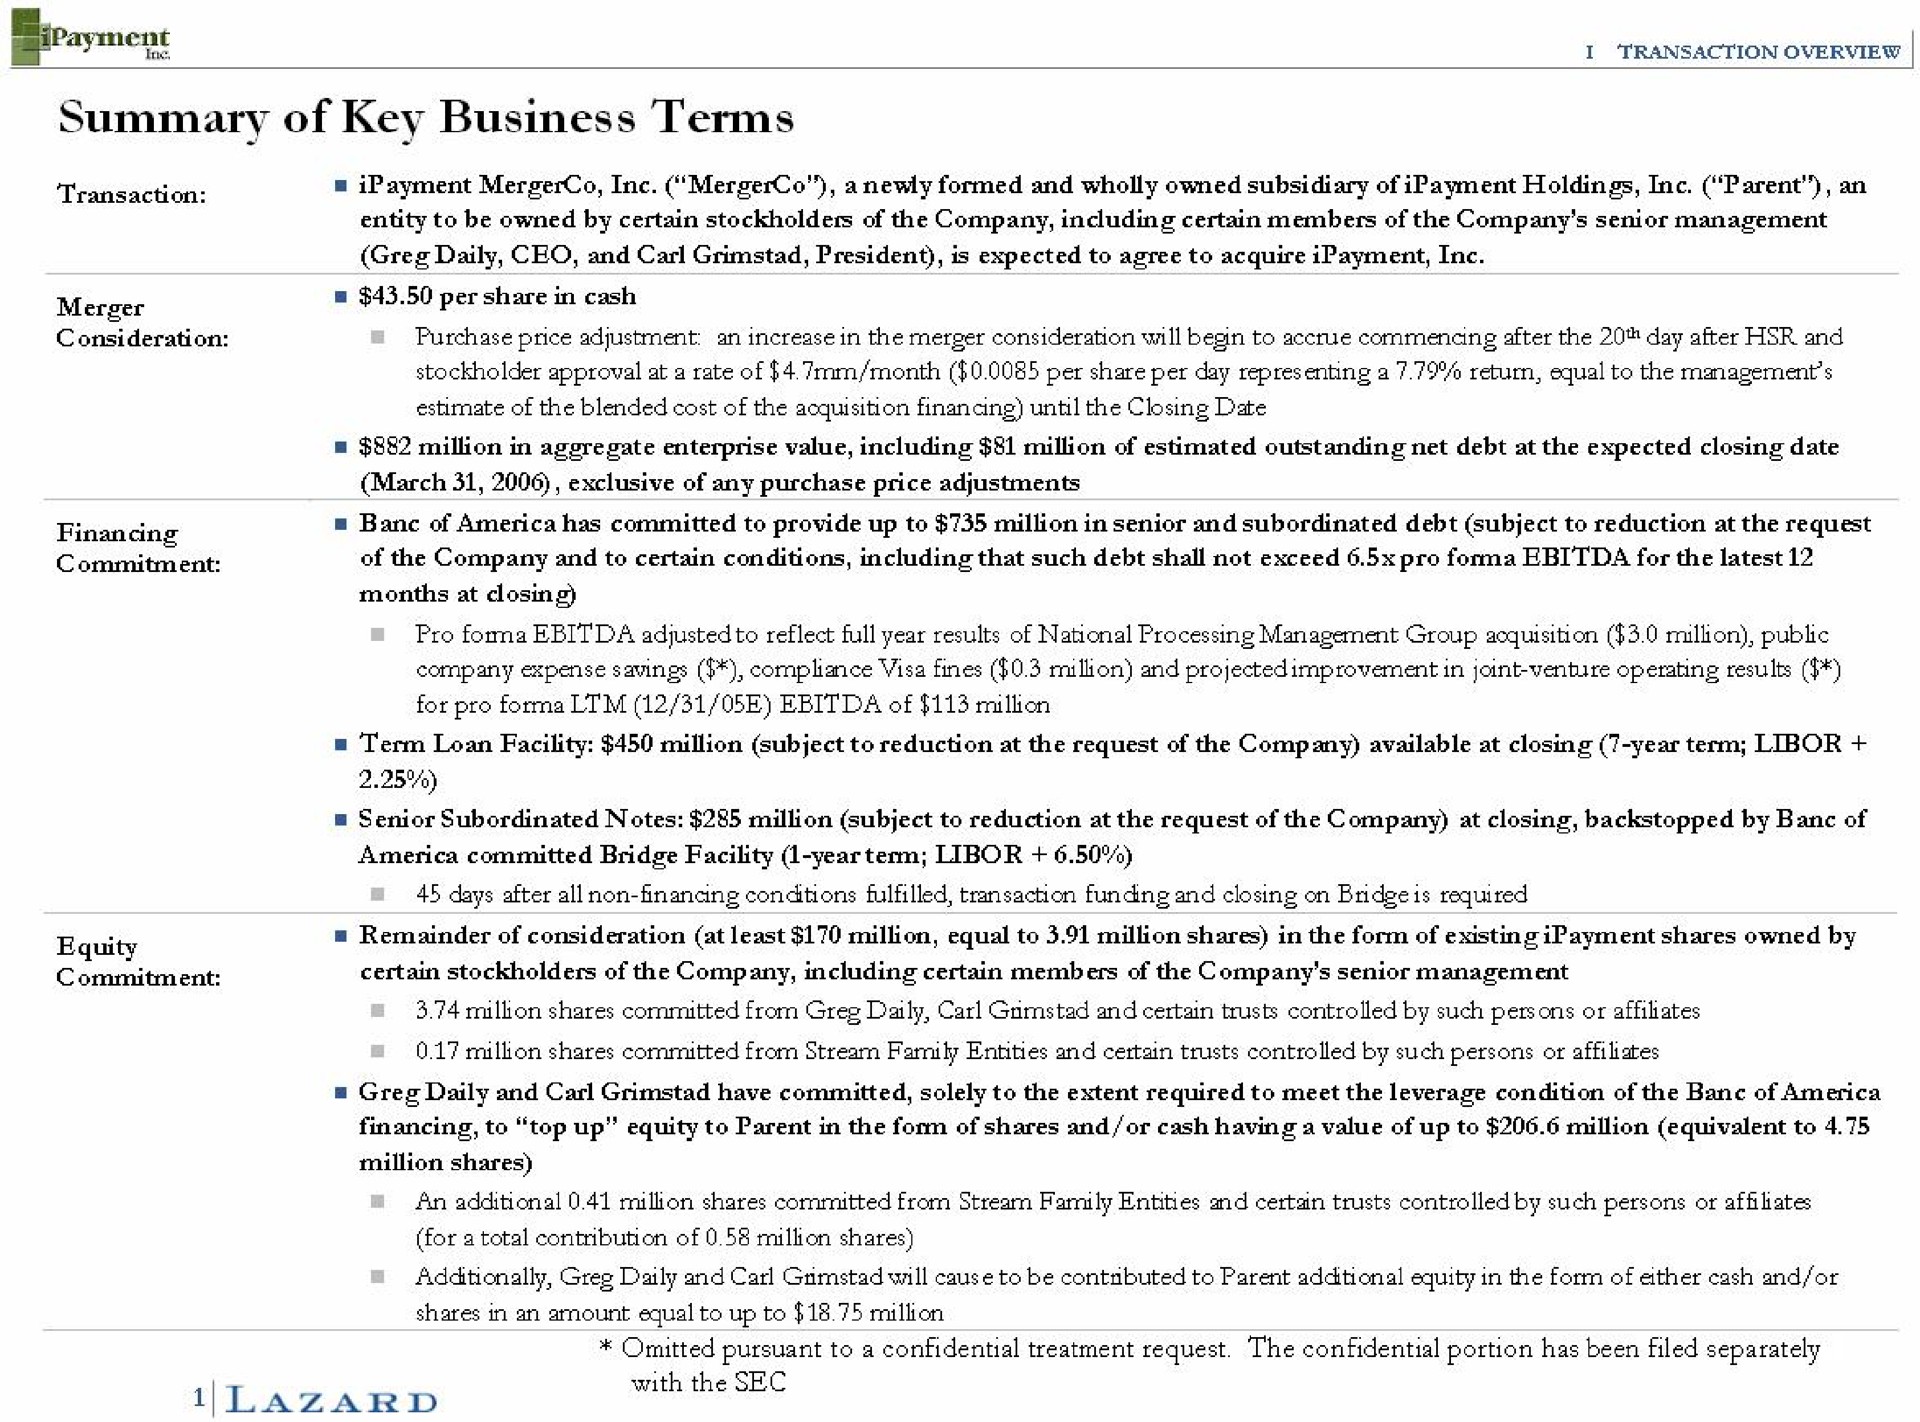 summary of key business terms equity | Lazard